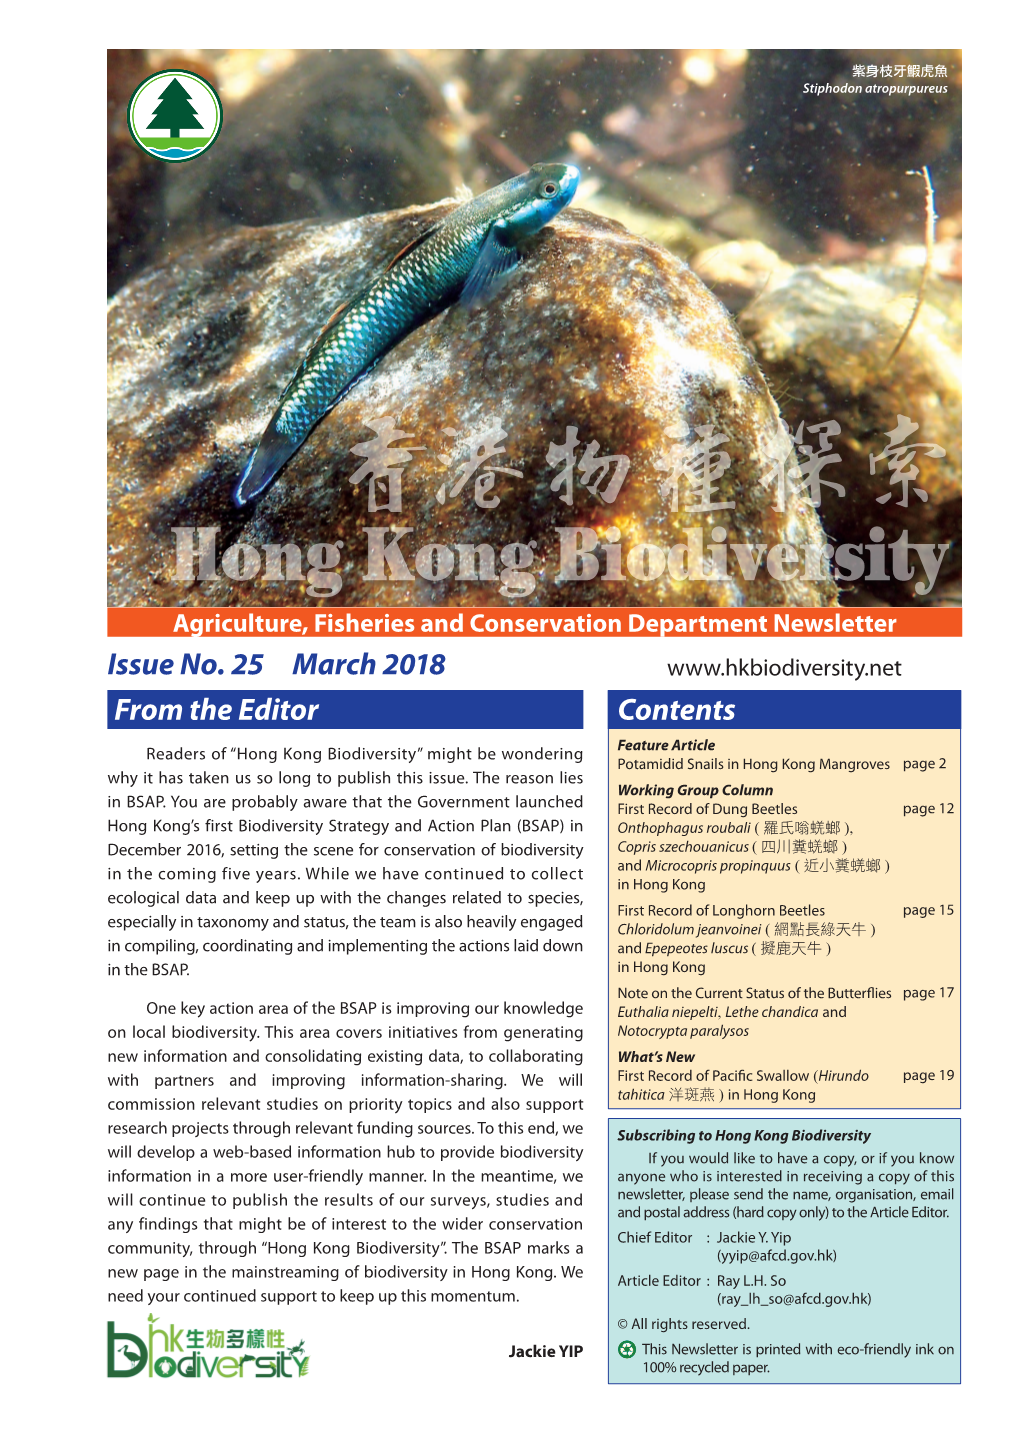 Hong Kong Biodiversity Agriculture, Fisheries and Conservation Department Newsletter Issue No